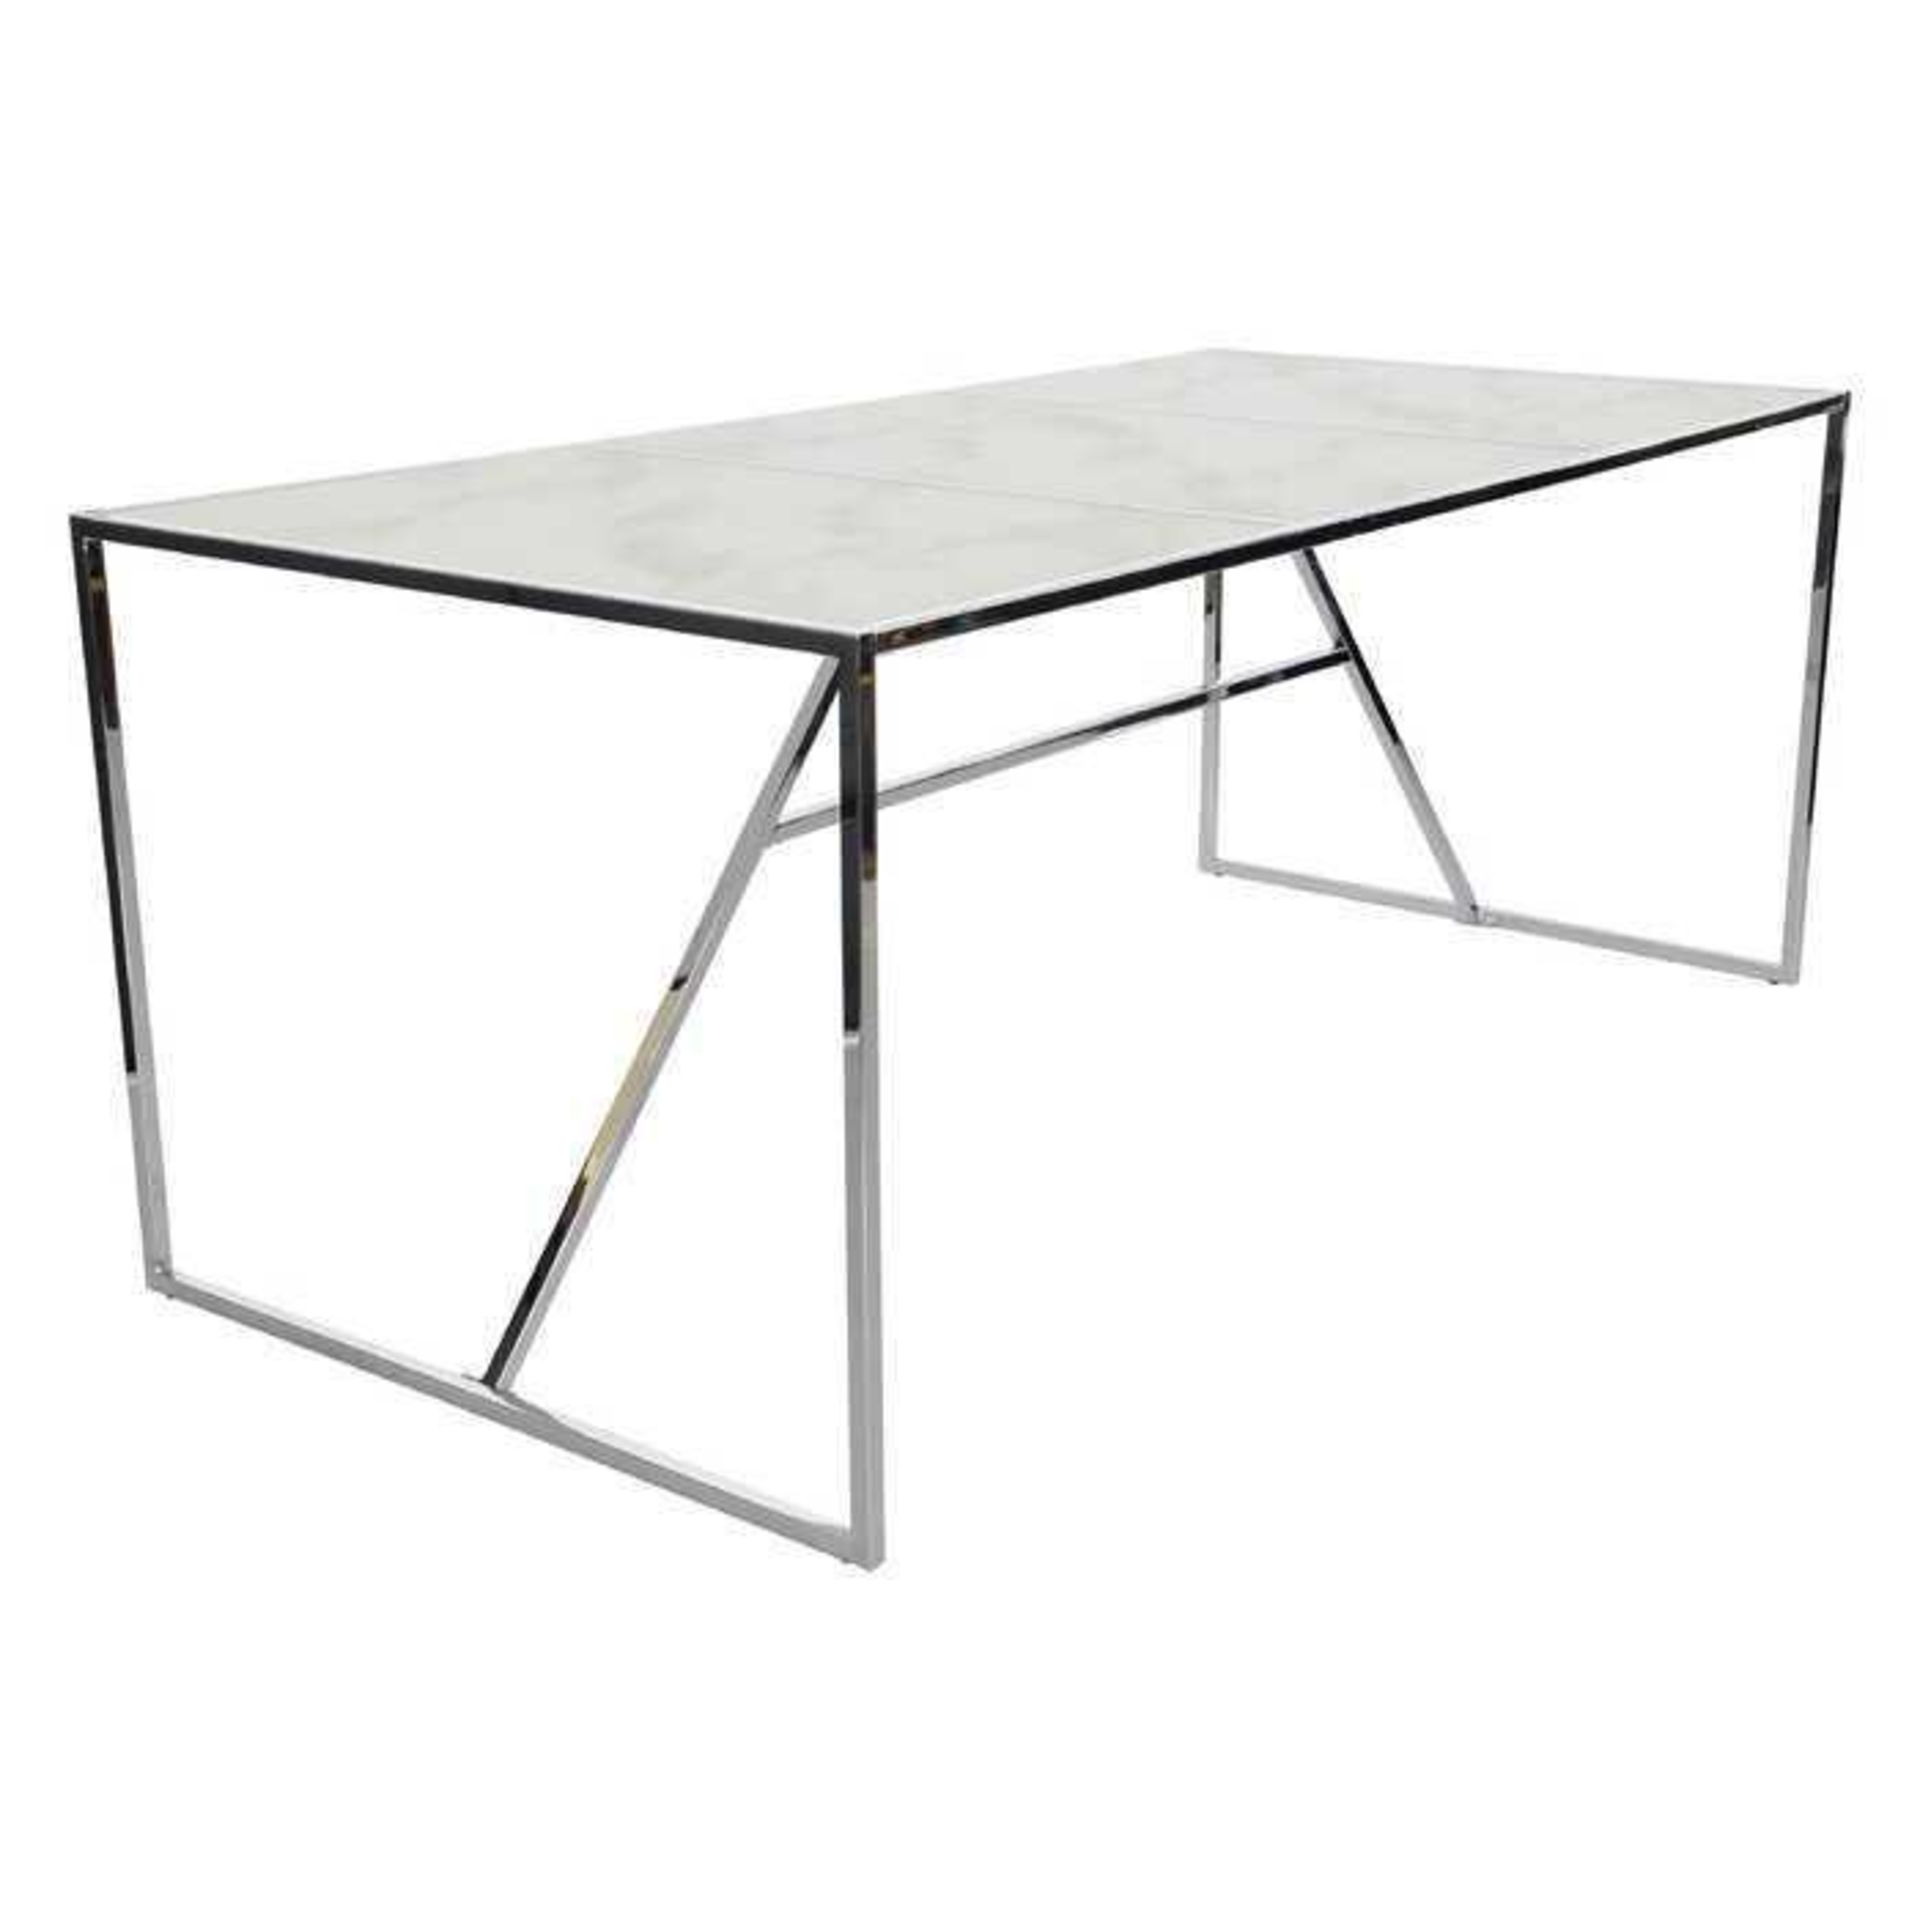 Boxed Montclair Canora Gray Dining Table RRP £700 (19143)(Appraisals Available On Request) (Pictures